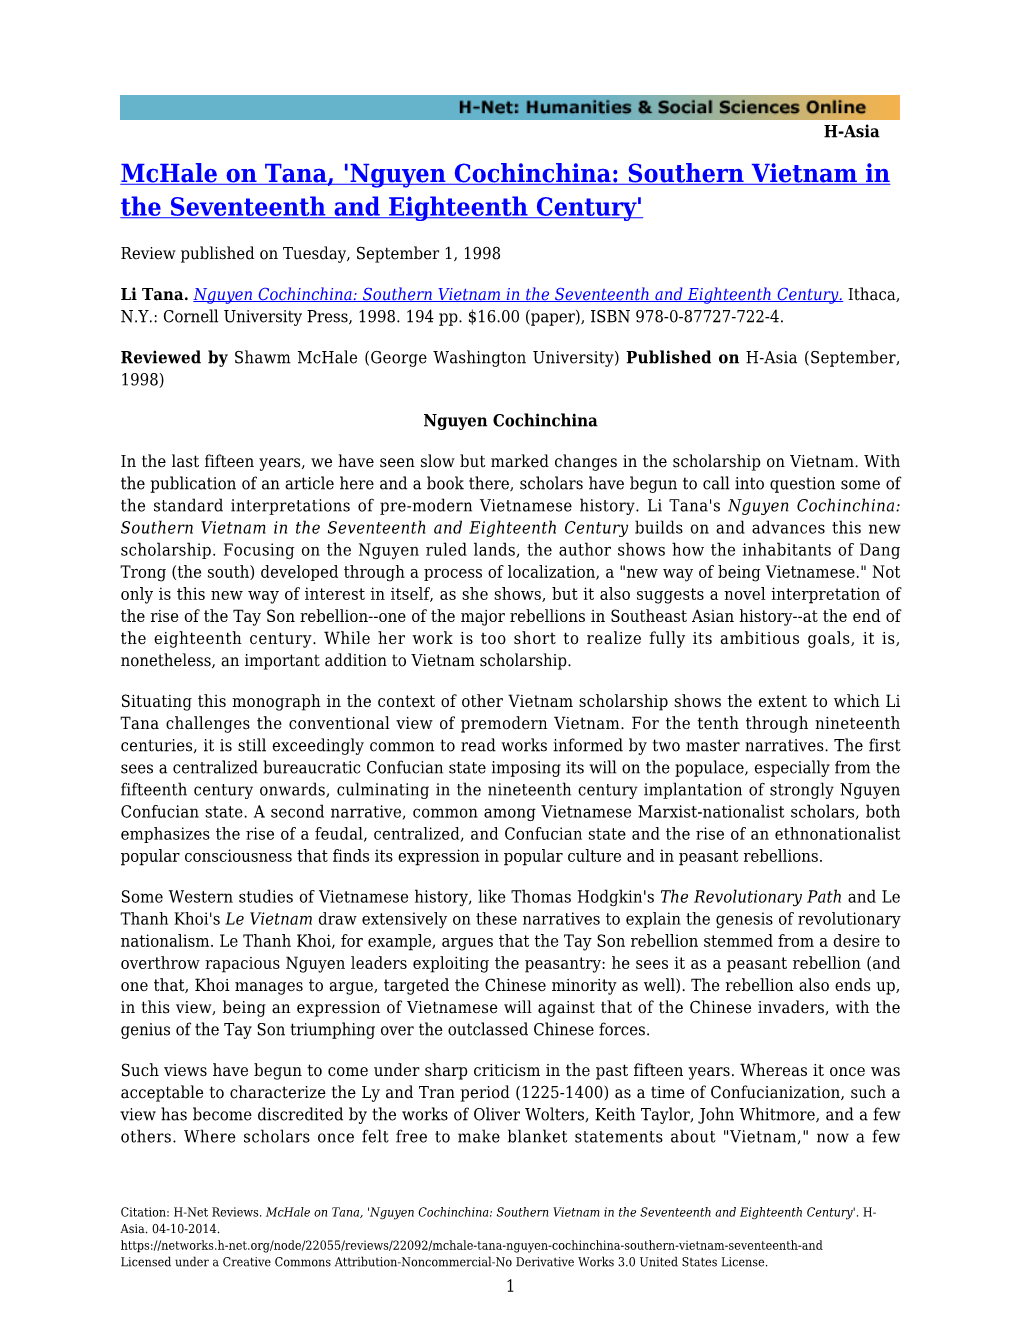 Nguyen Cochinchina: Southern Vietnam in the Seventeenth and Eighteenth Century'